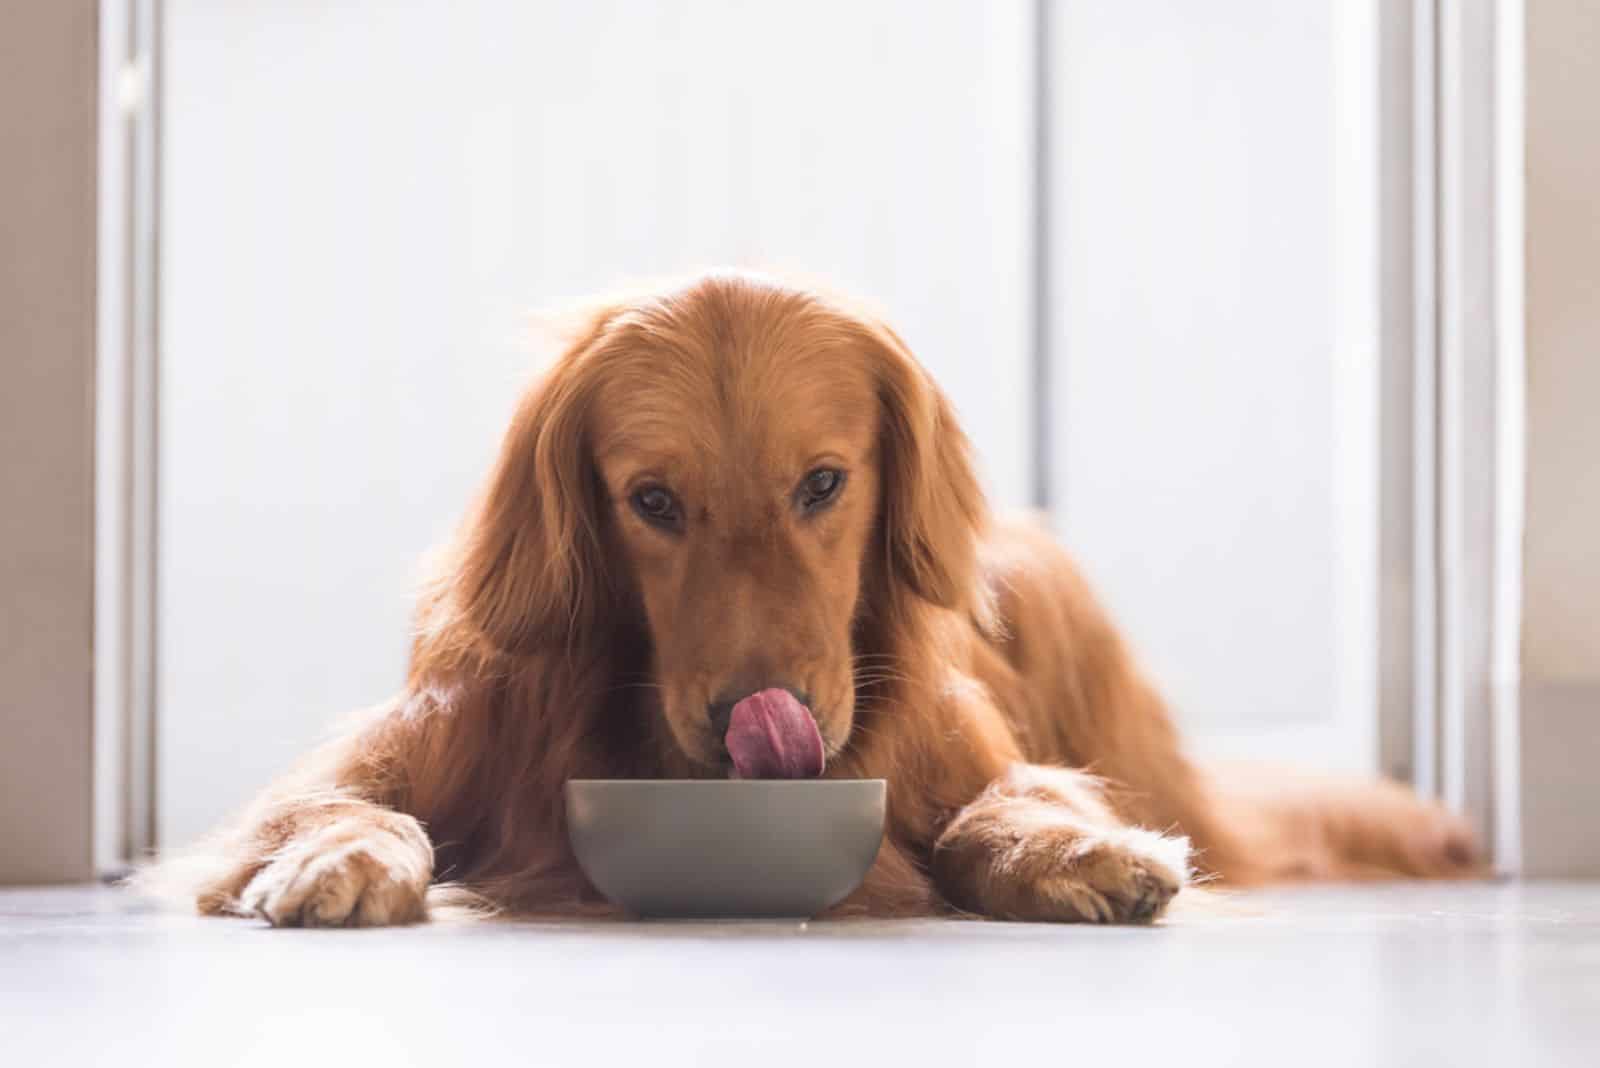 dog eating from a bowl in house